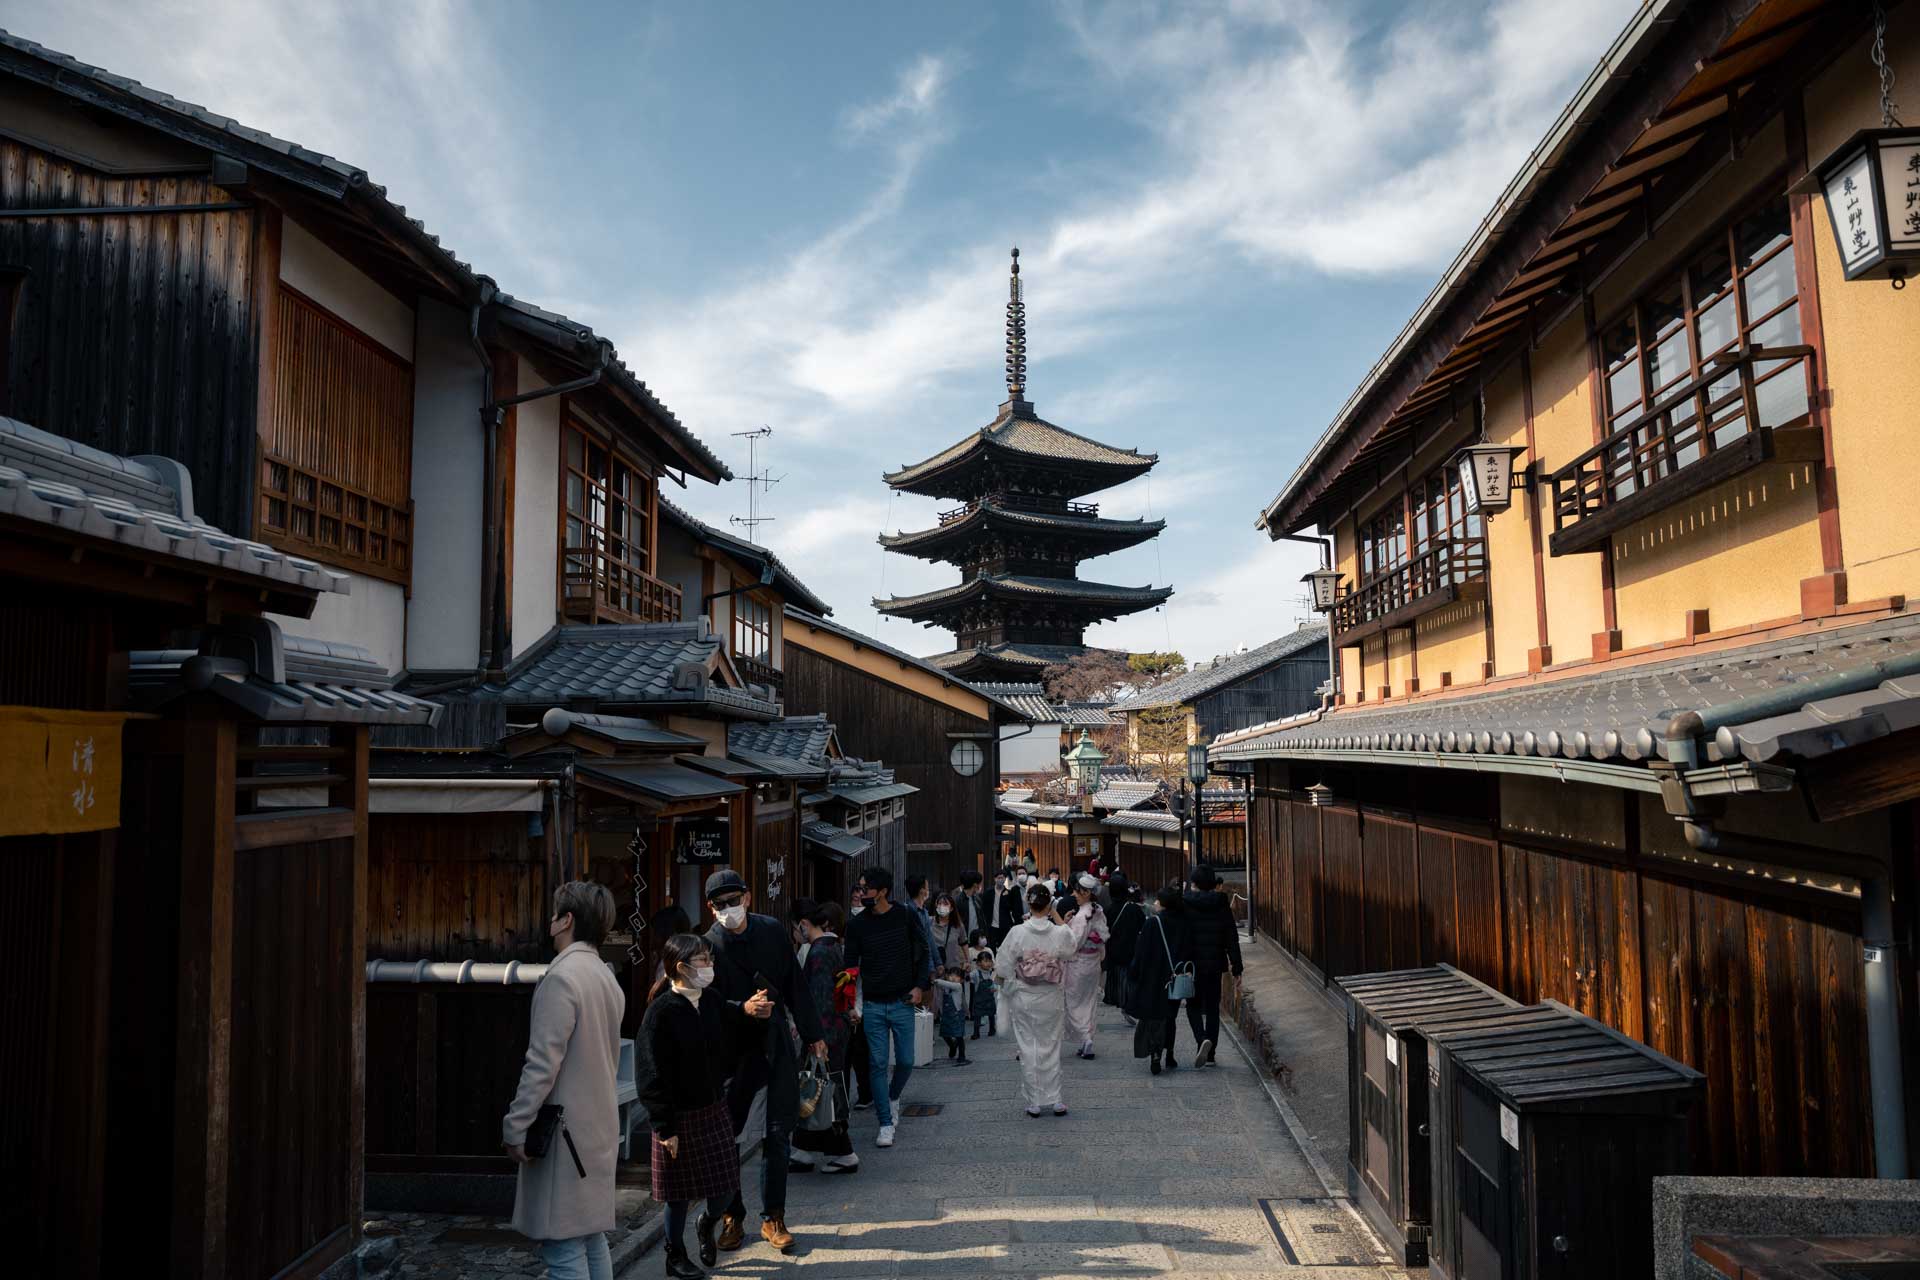 things to do in kyoto, kyoto tourist spots, places to visit in kyoto, kyoto attractions, tourist spots in kyoto, what to do in kyoto